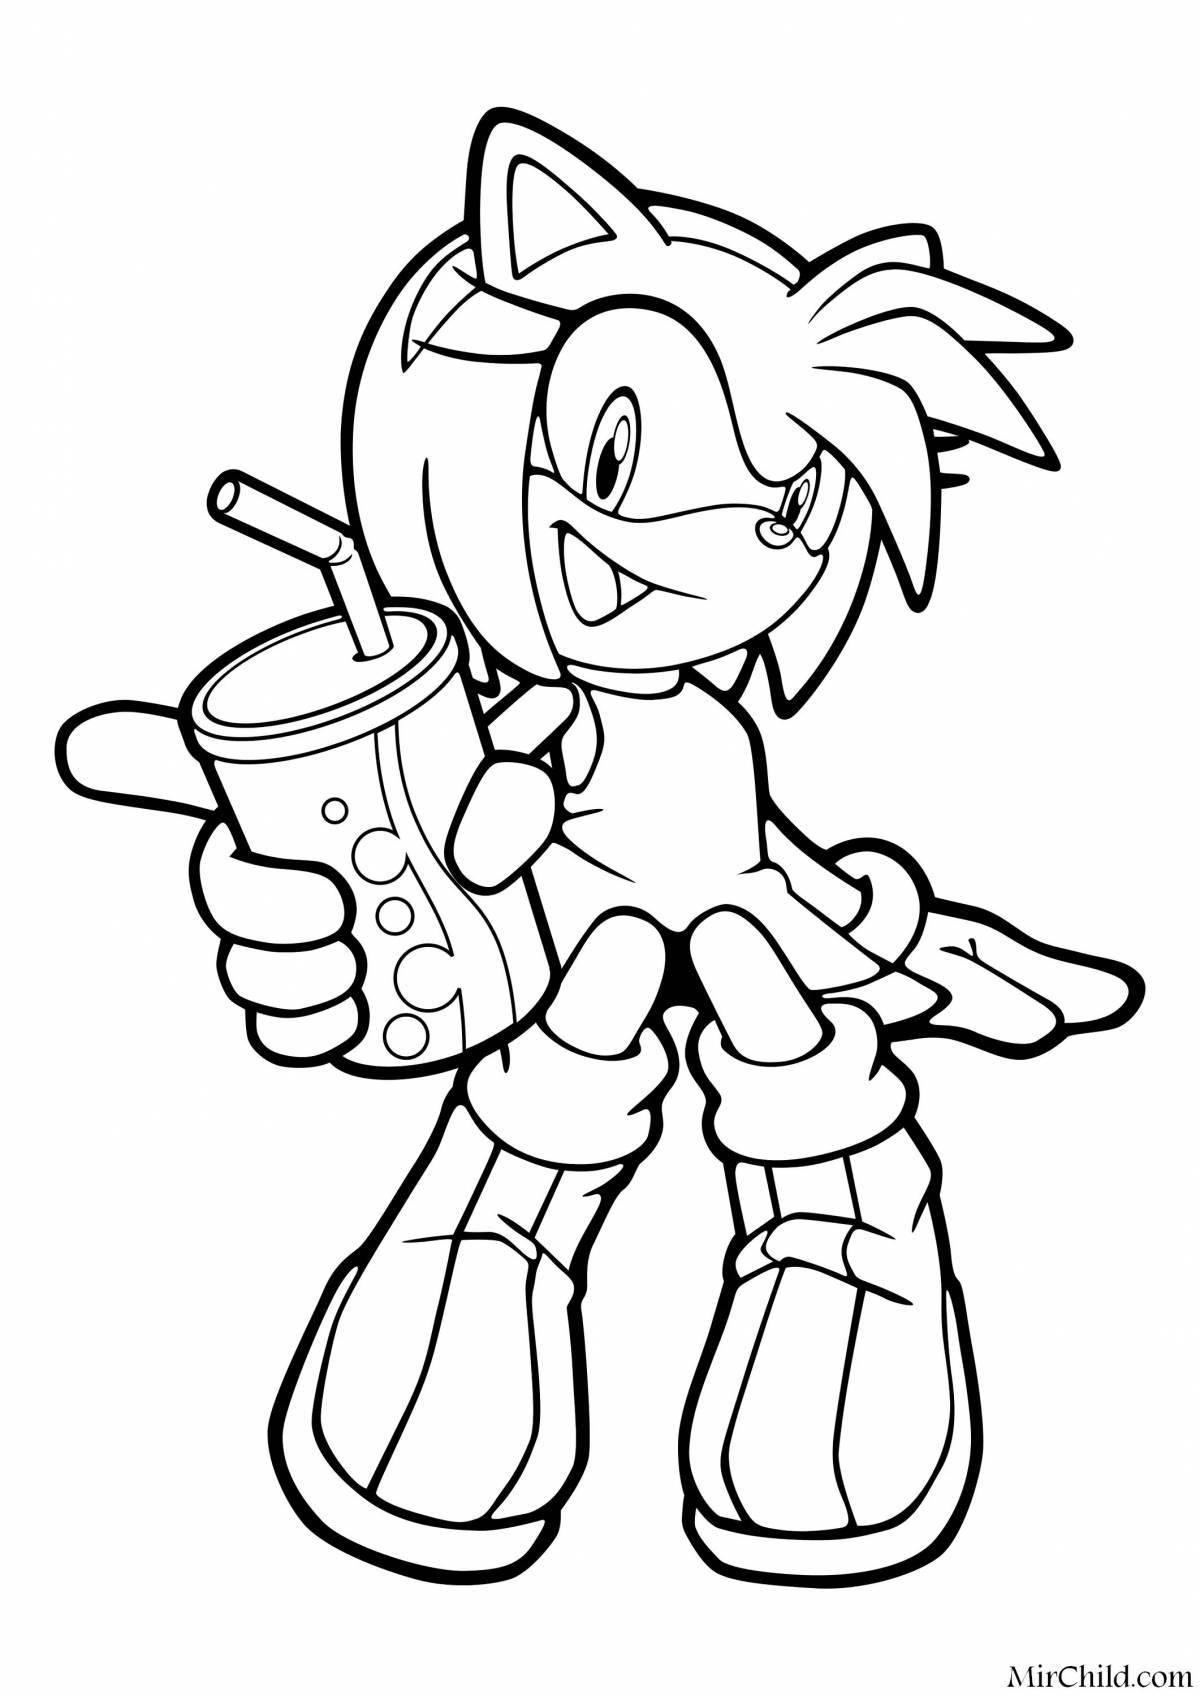 Amazing sonic amy coloring book